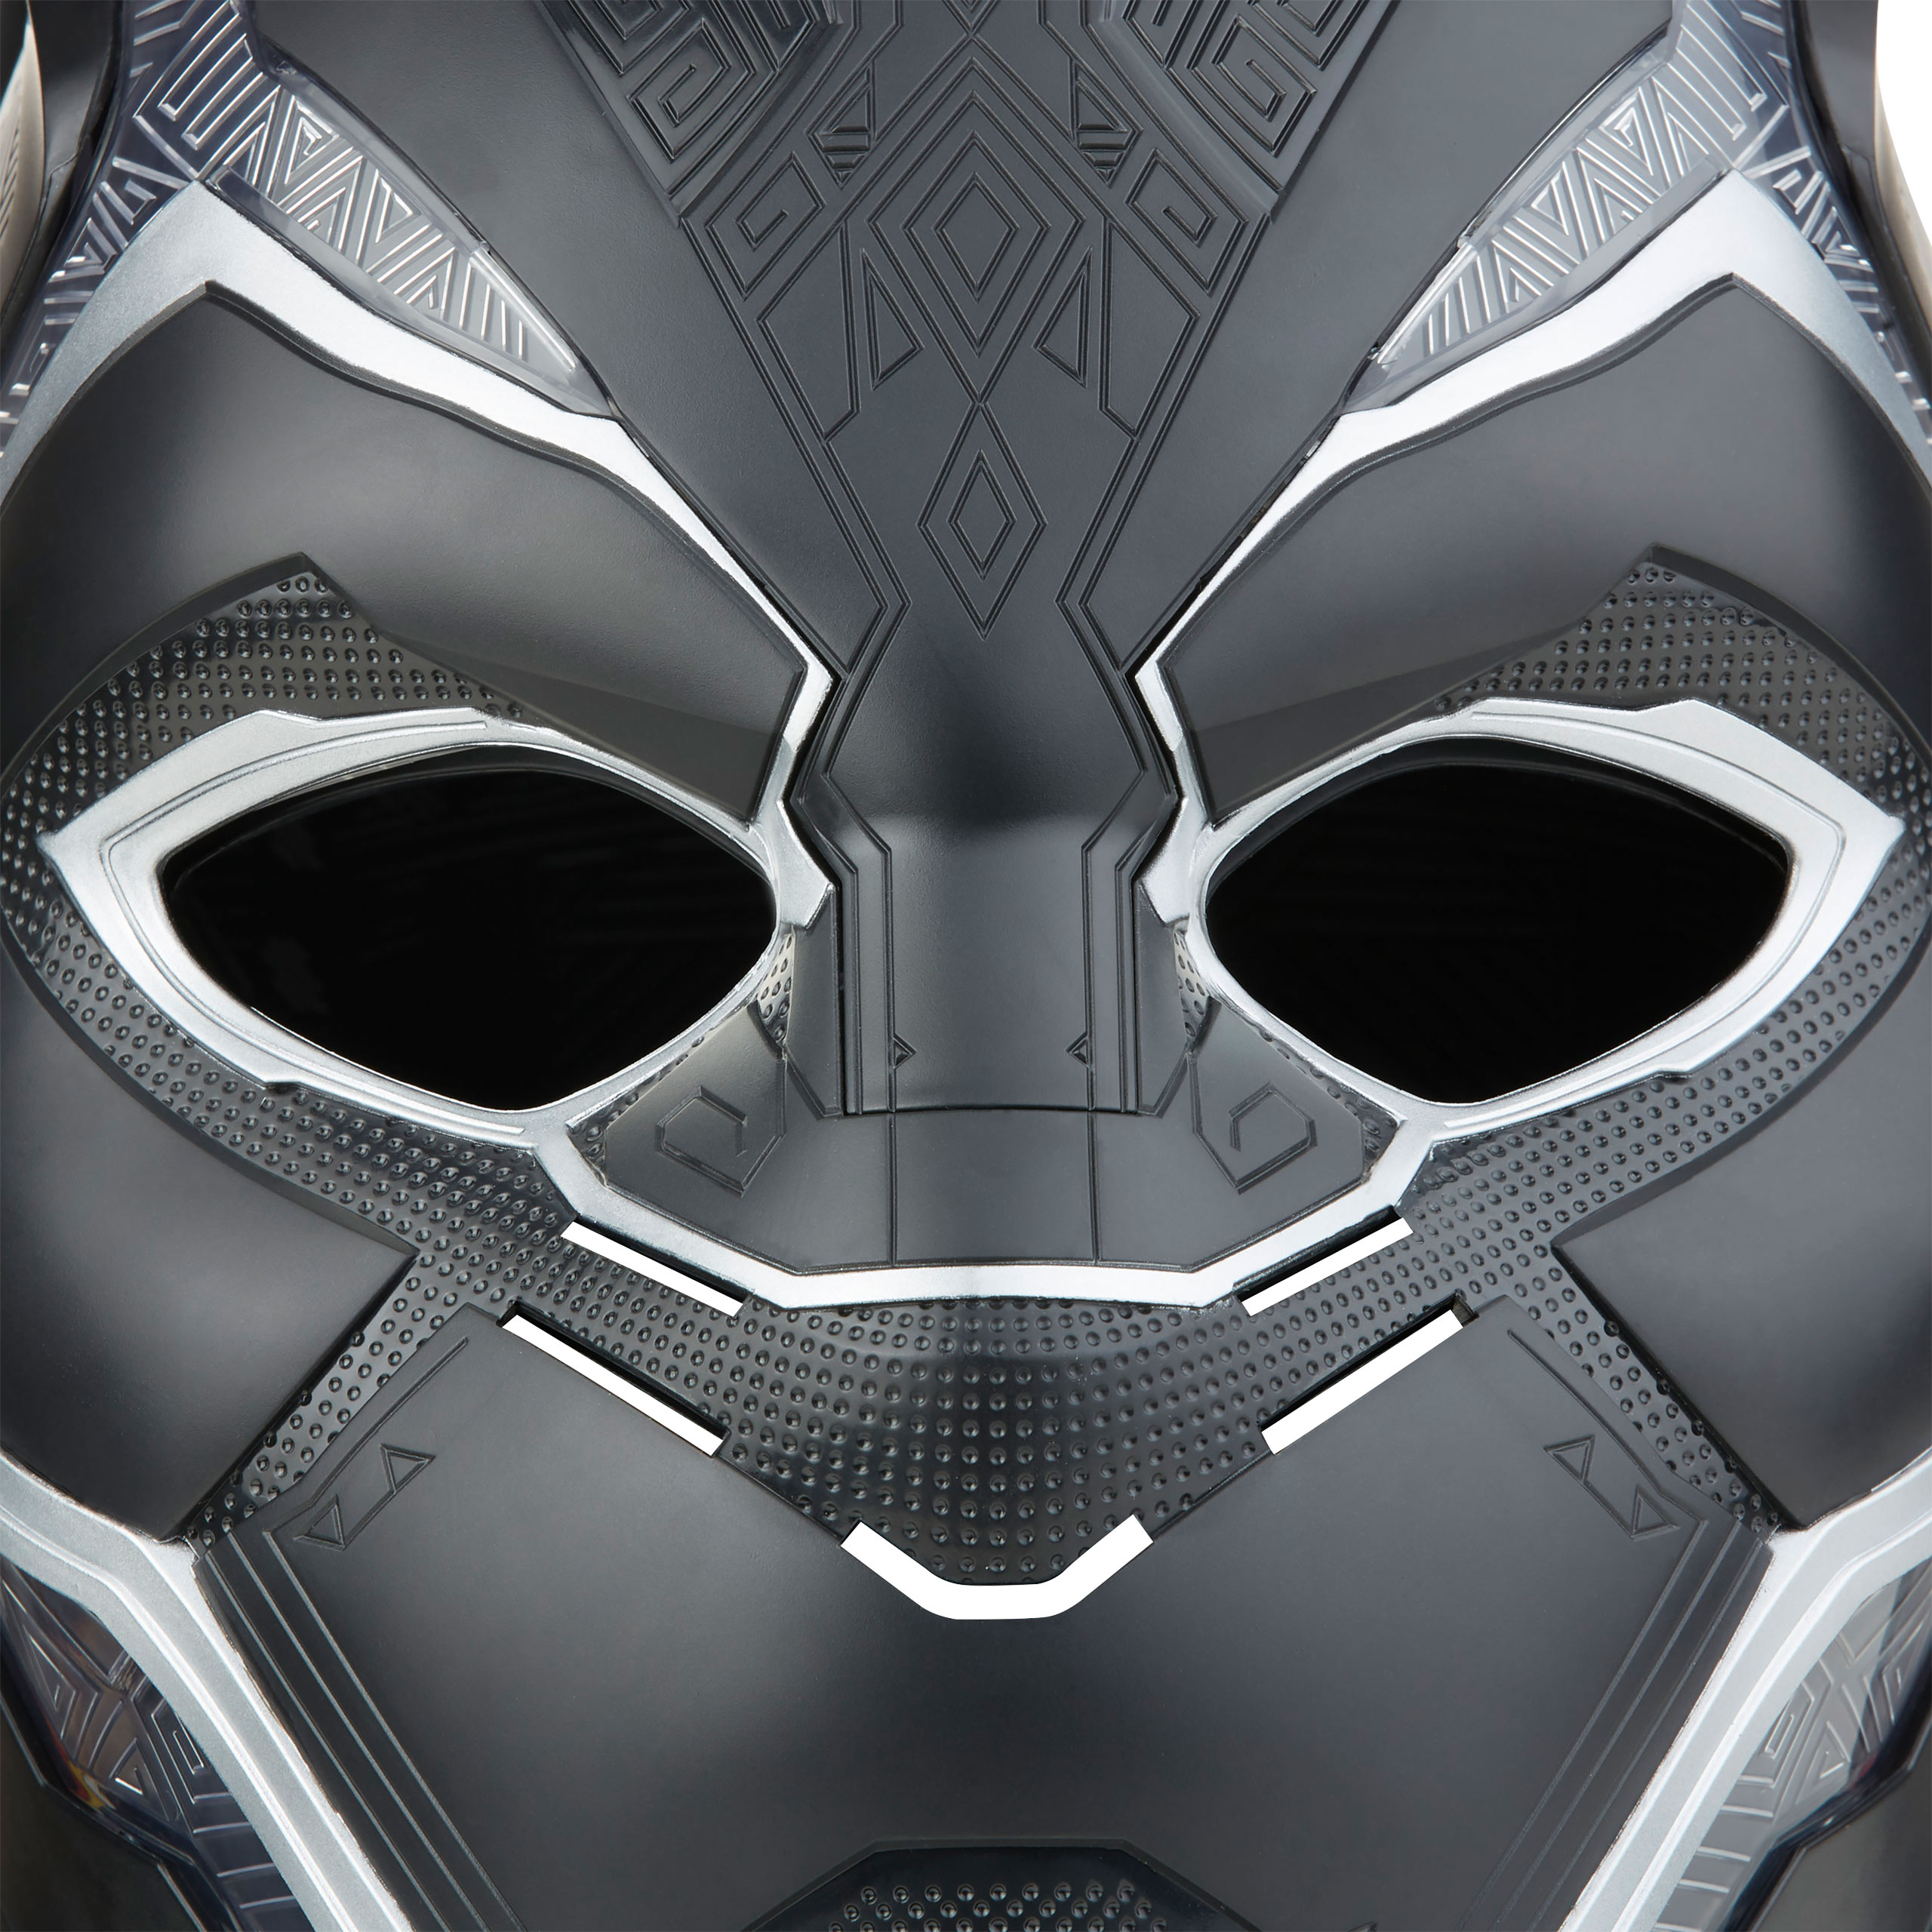 Marvel - Black Panther Helmet Replica with Light Effects